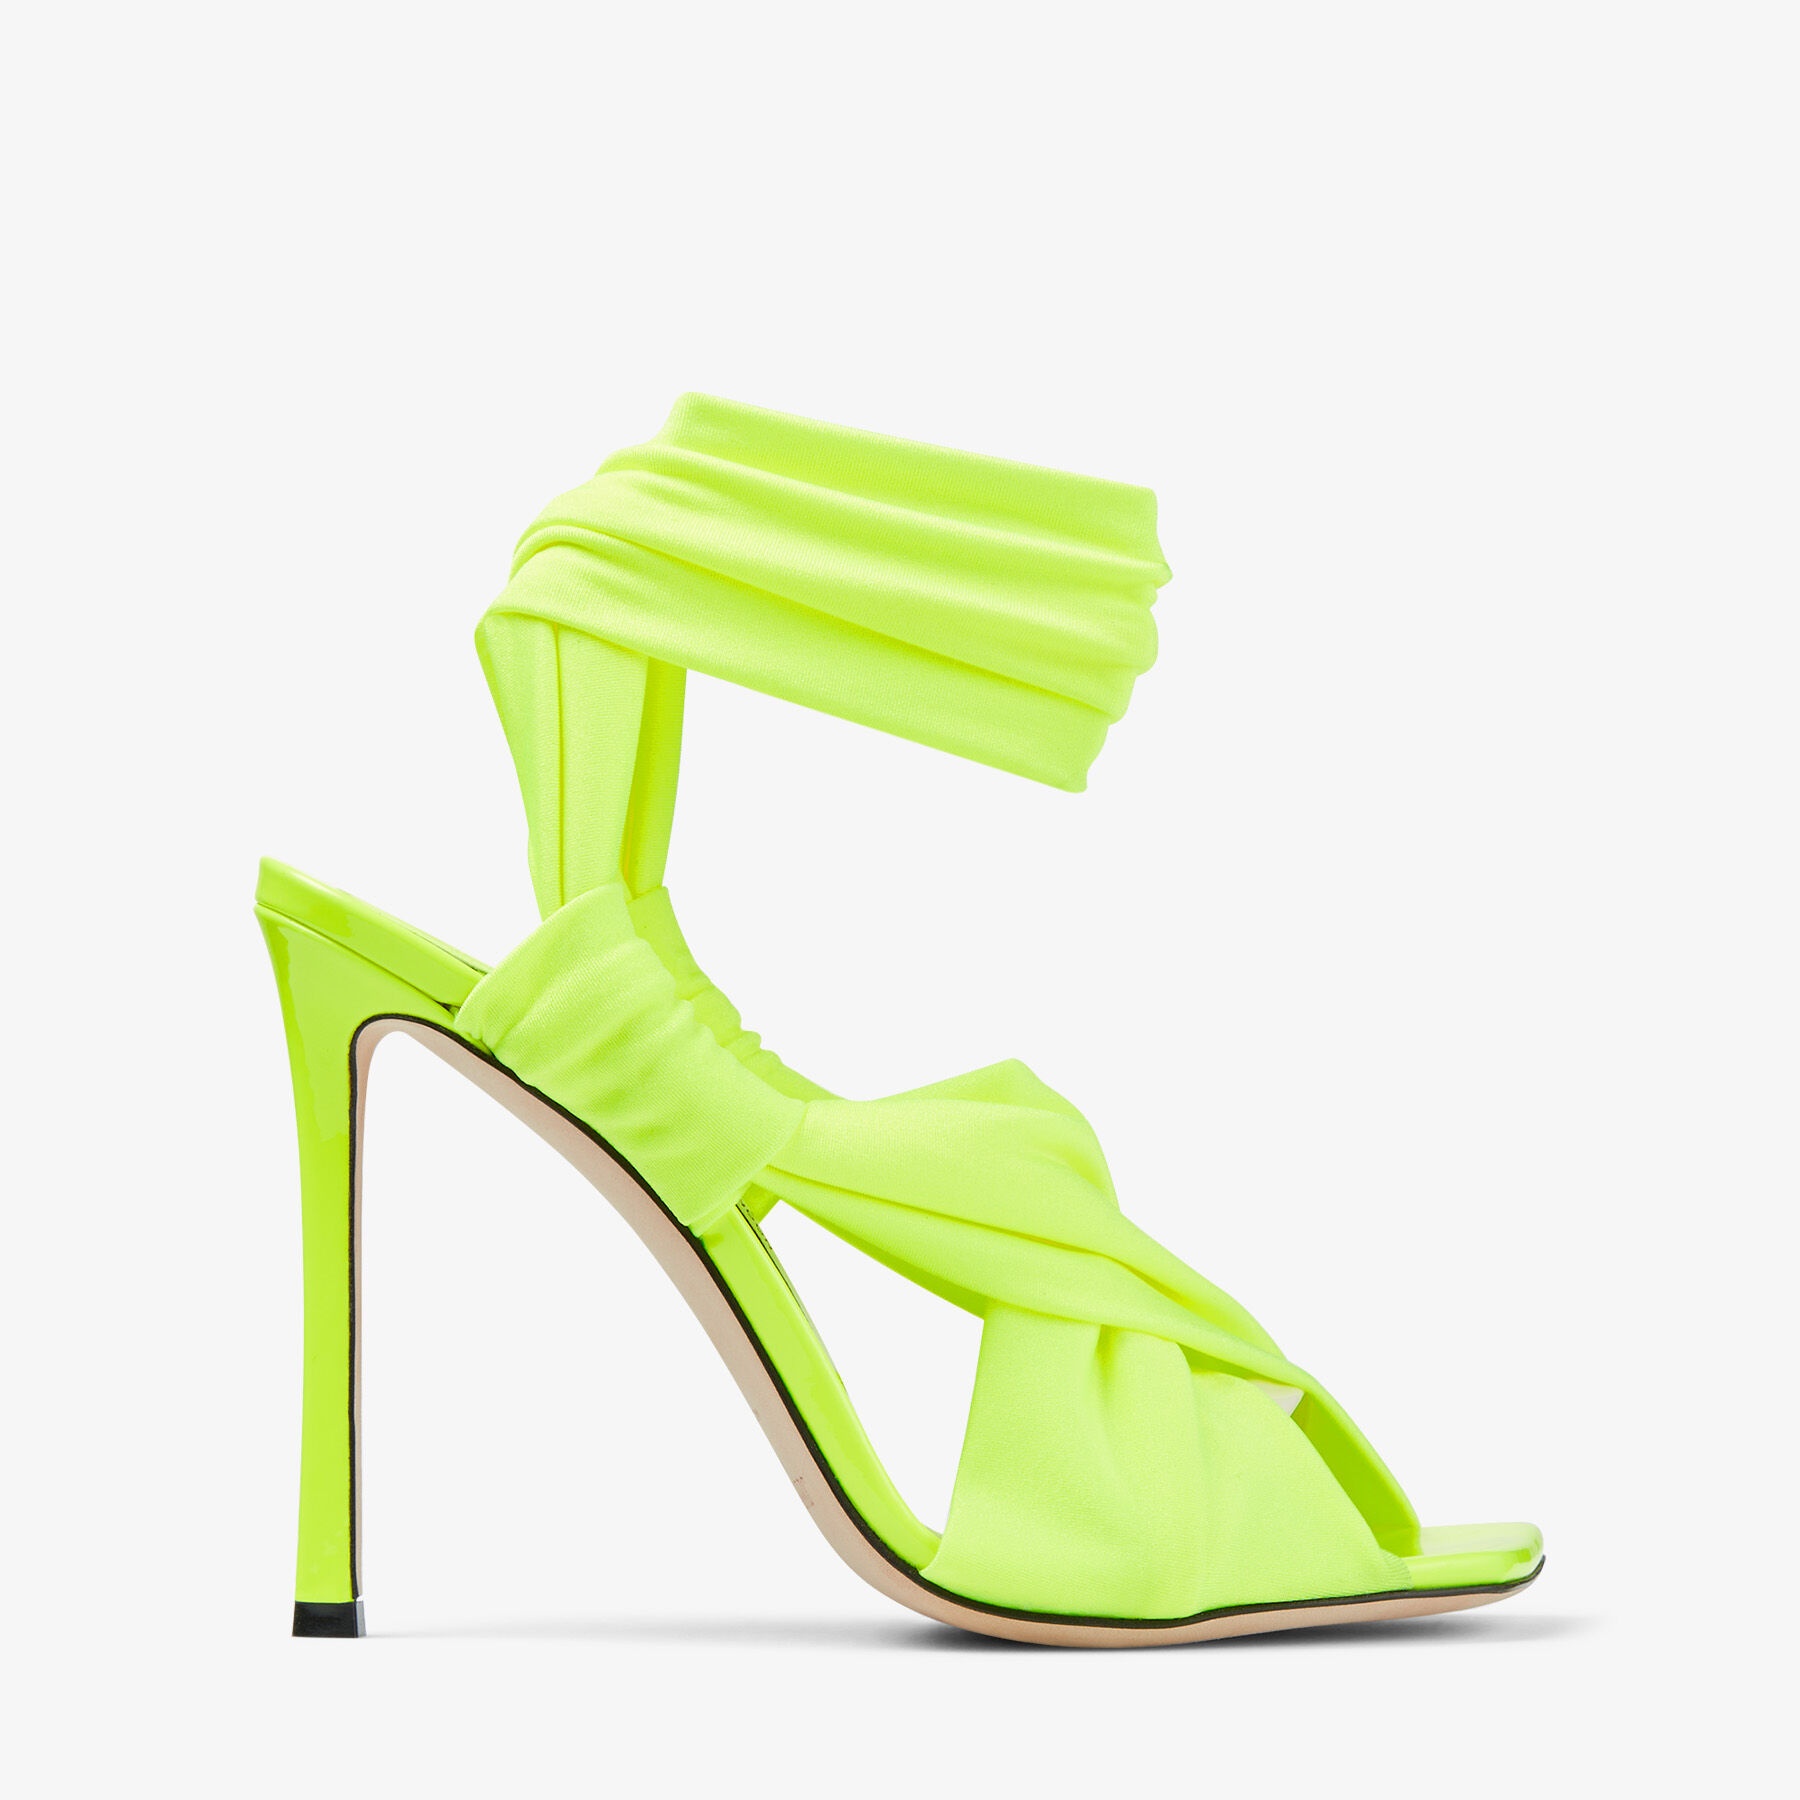 Neoma 110
Neon Apple Green Glossy Jersey Sandals - 1